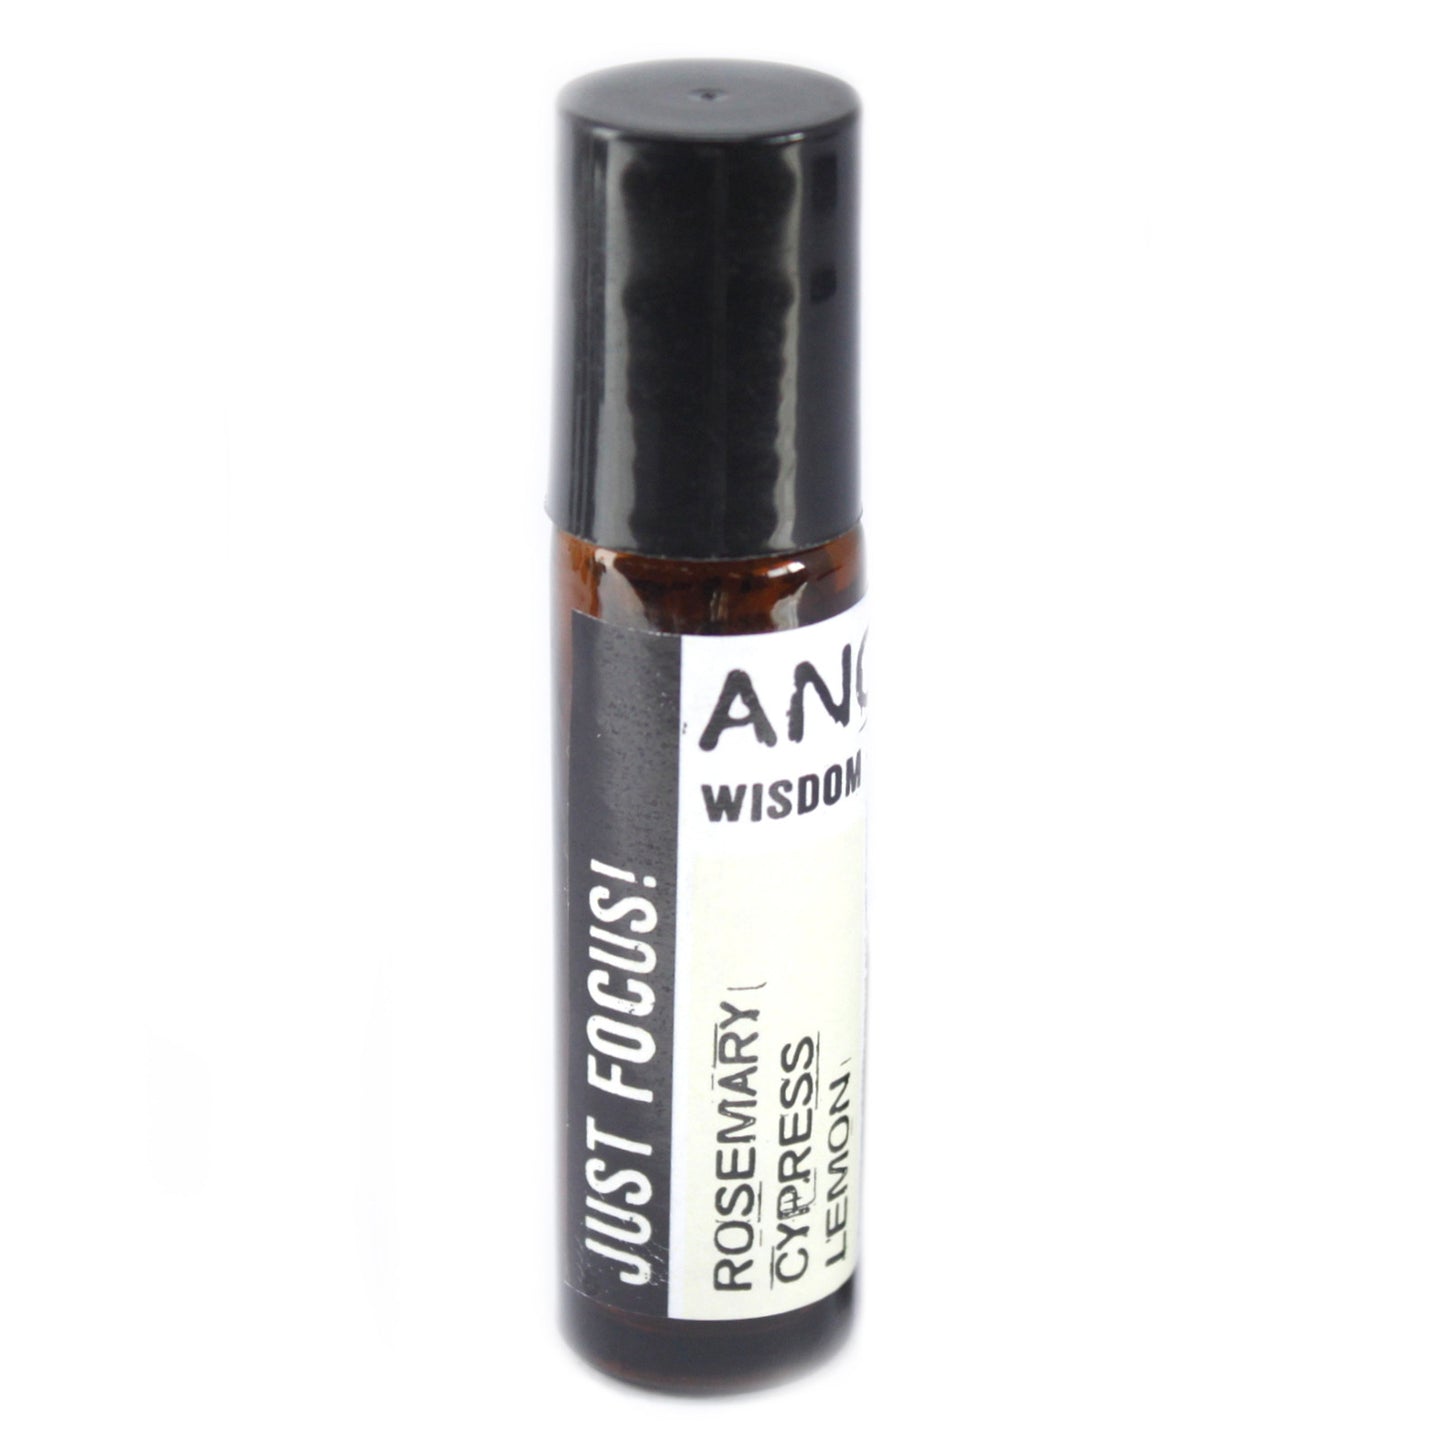 Just Focus - Rosemary , Cypress and Lemon 10ml Roll On Essential Oil Blend